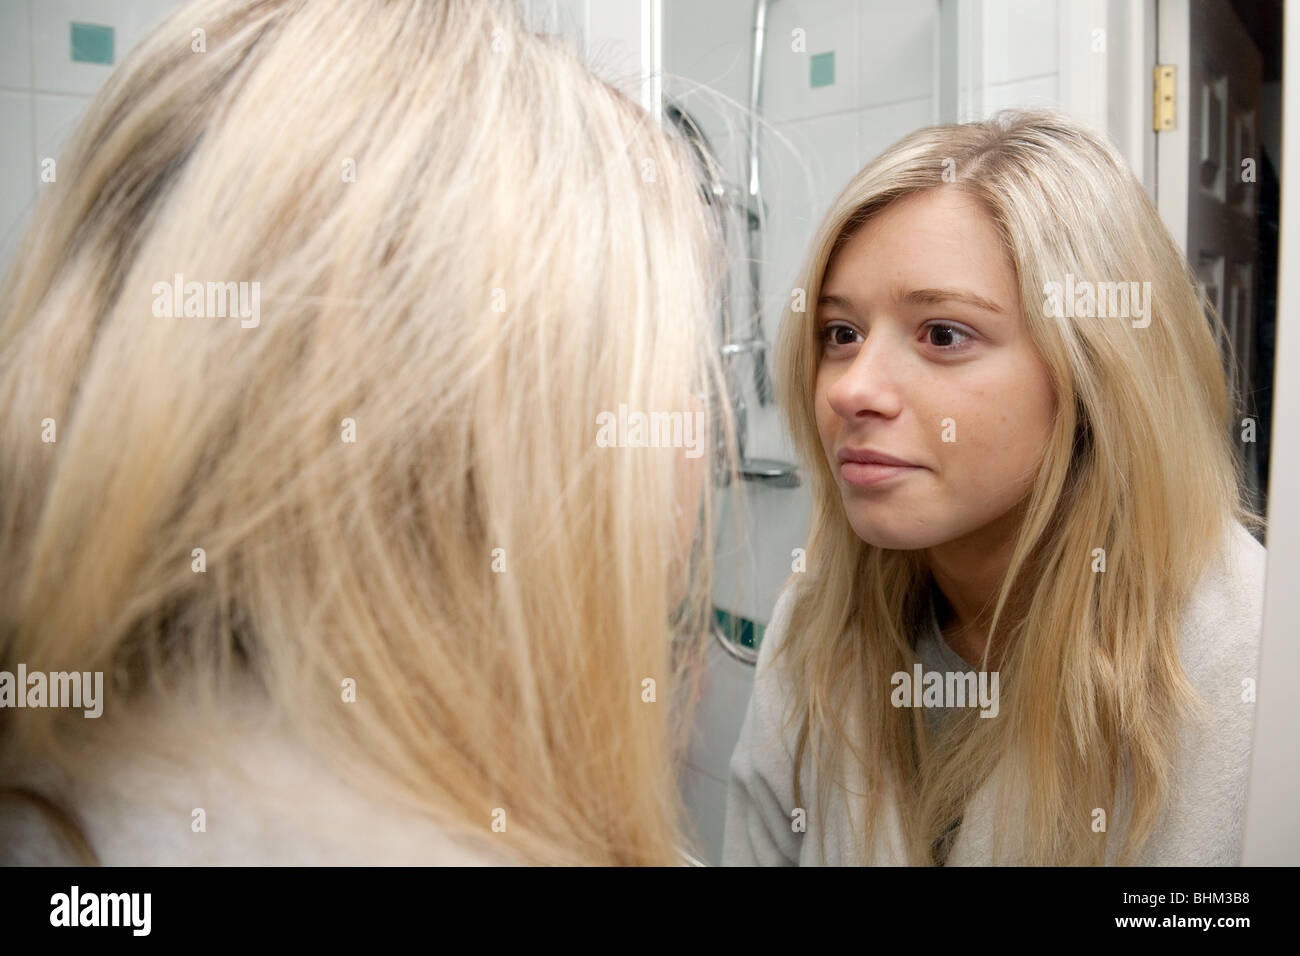 blonde teenage girl looking at her reflection in her bathroom mirror Stock Photo